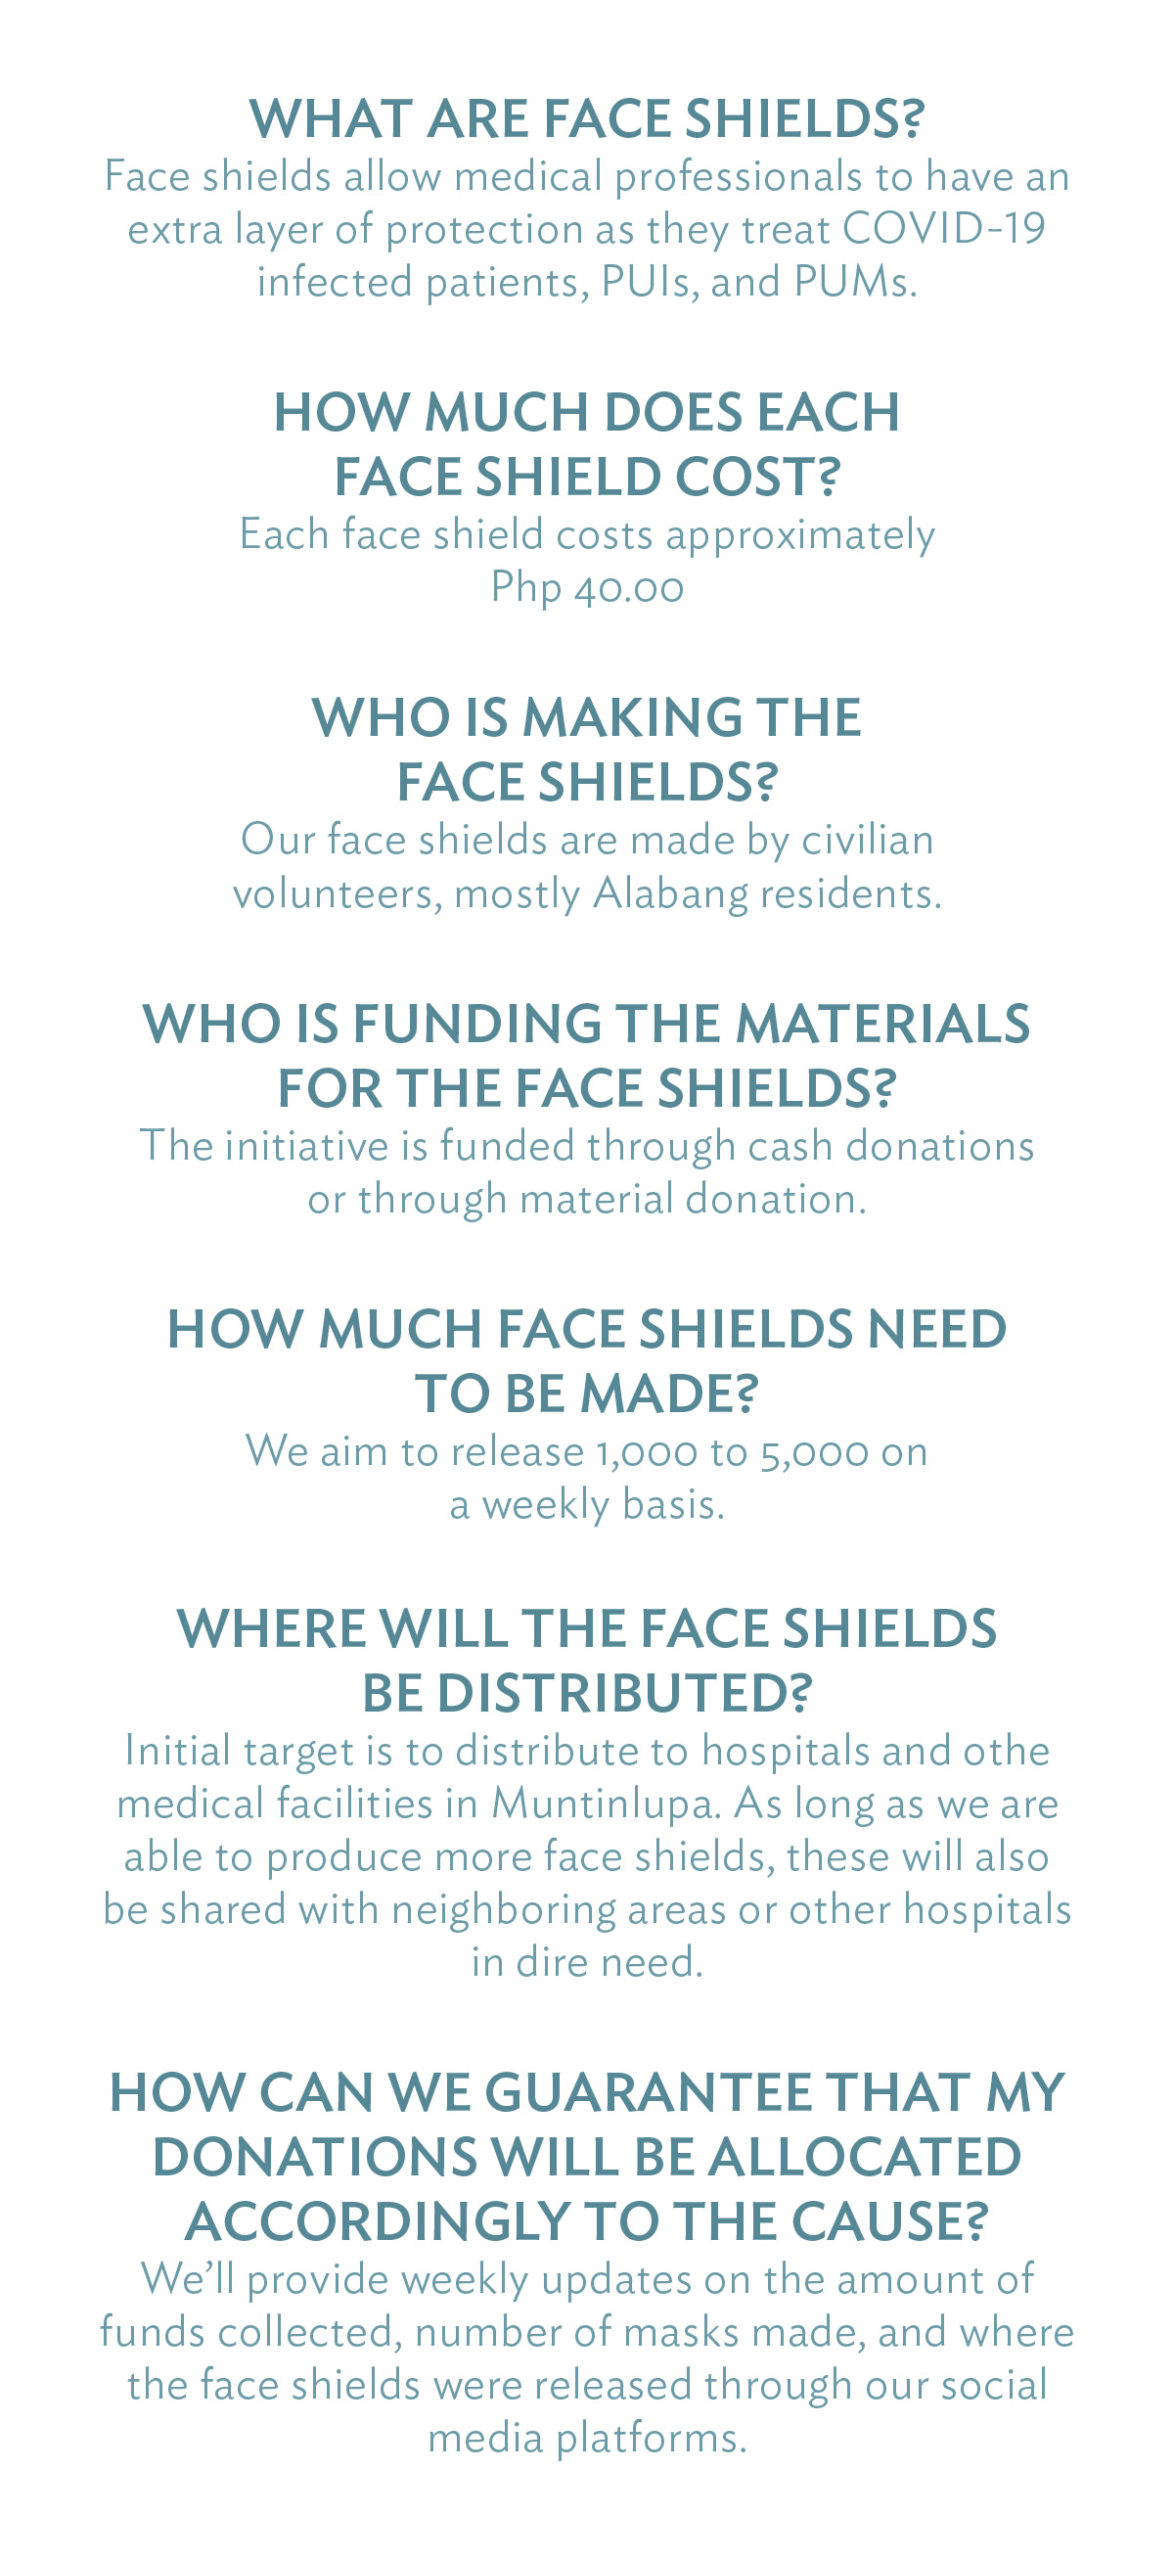 What are Face Shields? Face shields allow medical professionals to have an extra layer of protection as they treat COVID-19 infected patients, PUIs, and PUMs. How much does each face shield cost? Each face shield costs approximately Php 40.00 Who is making the face shields? Our face shields are made by civilian volunteers, mostly Alabang residents. Who is funding the materials for the face shields? The initiative is funded through cash donations or through material donation. How much face shields need to be made? We aim to release 1,000 to 5,000 on a weekly basis. Where will the face shields be distributed? Initial target is to distribute to hospitals and othe medical facilities in Muntinlupa. As long as we are able to produce more face shields, these will also be shared with neighboring areas or other hospitals in dire need. How can we guarantee that my donations will be allocated accordingly to the cause? We’ll provide weekly updates on the amount of funds collected, number of masks made, and where the face shields were released through our social media platforms.